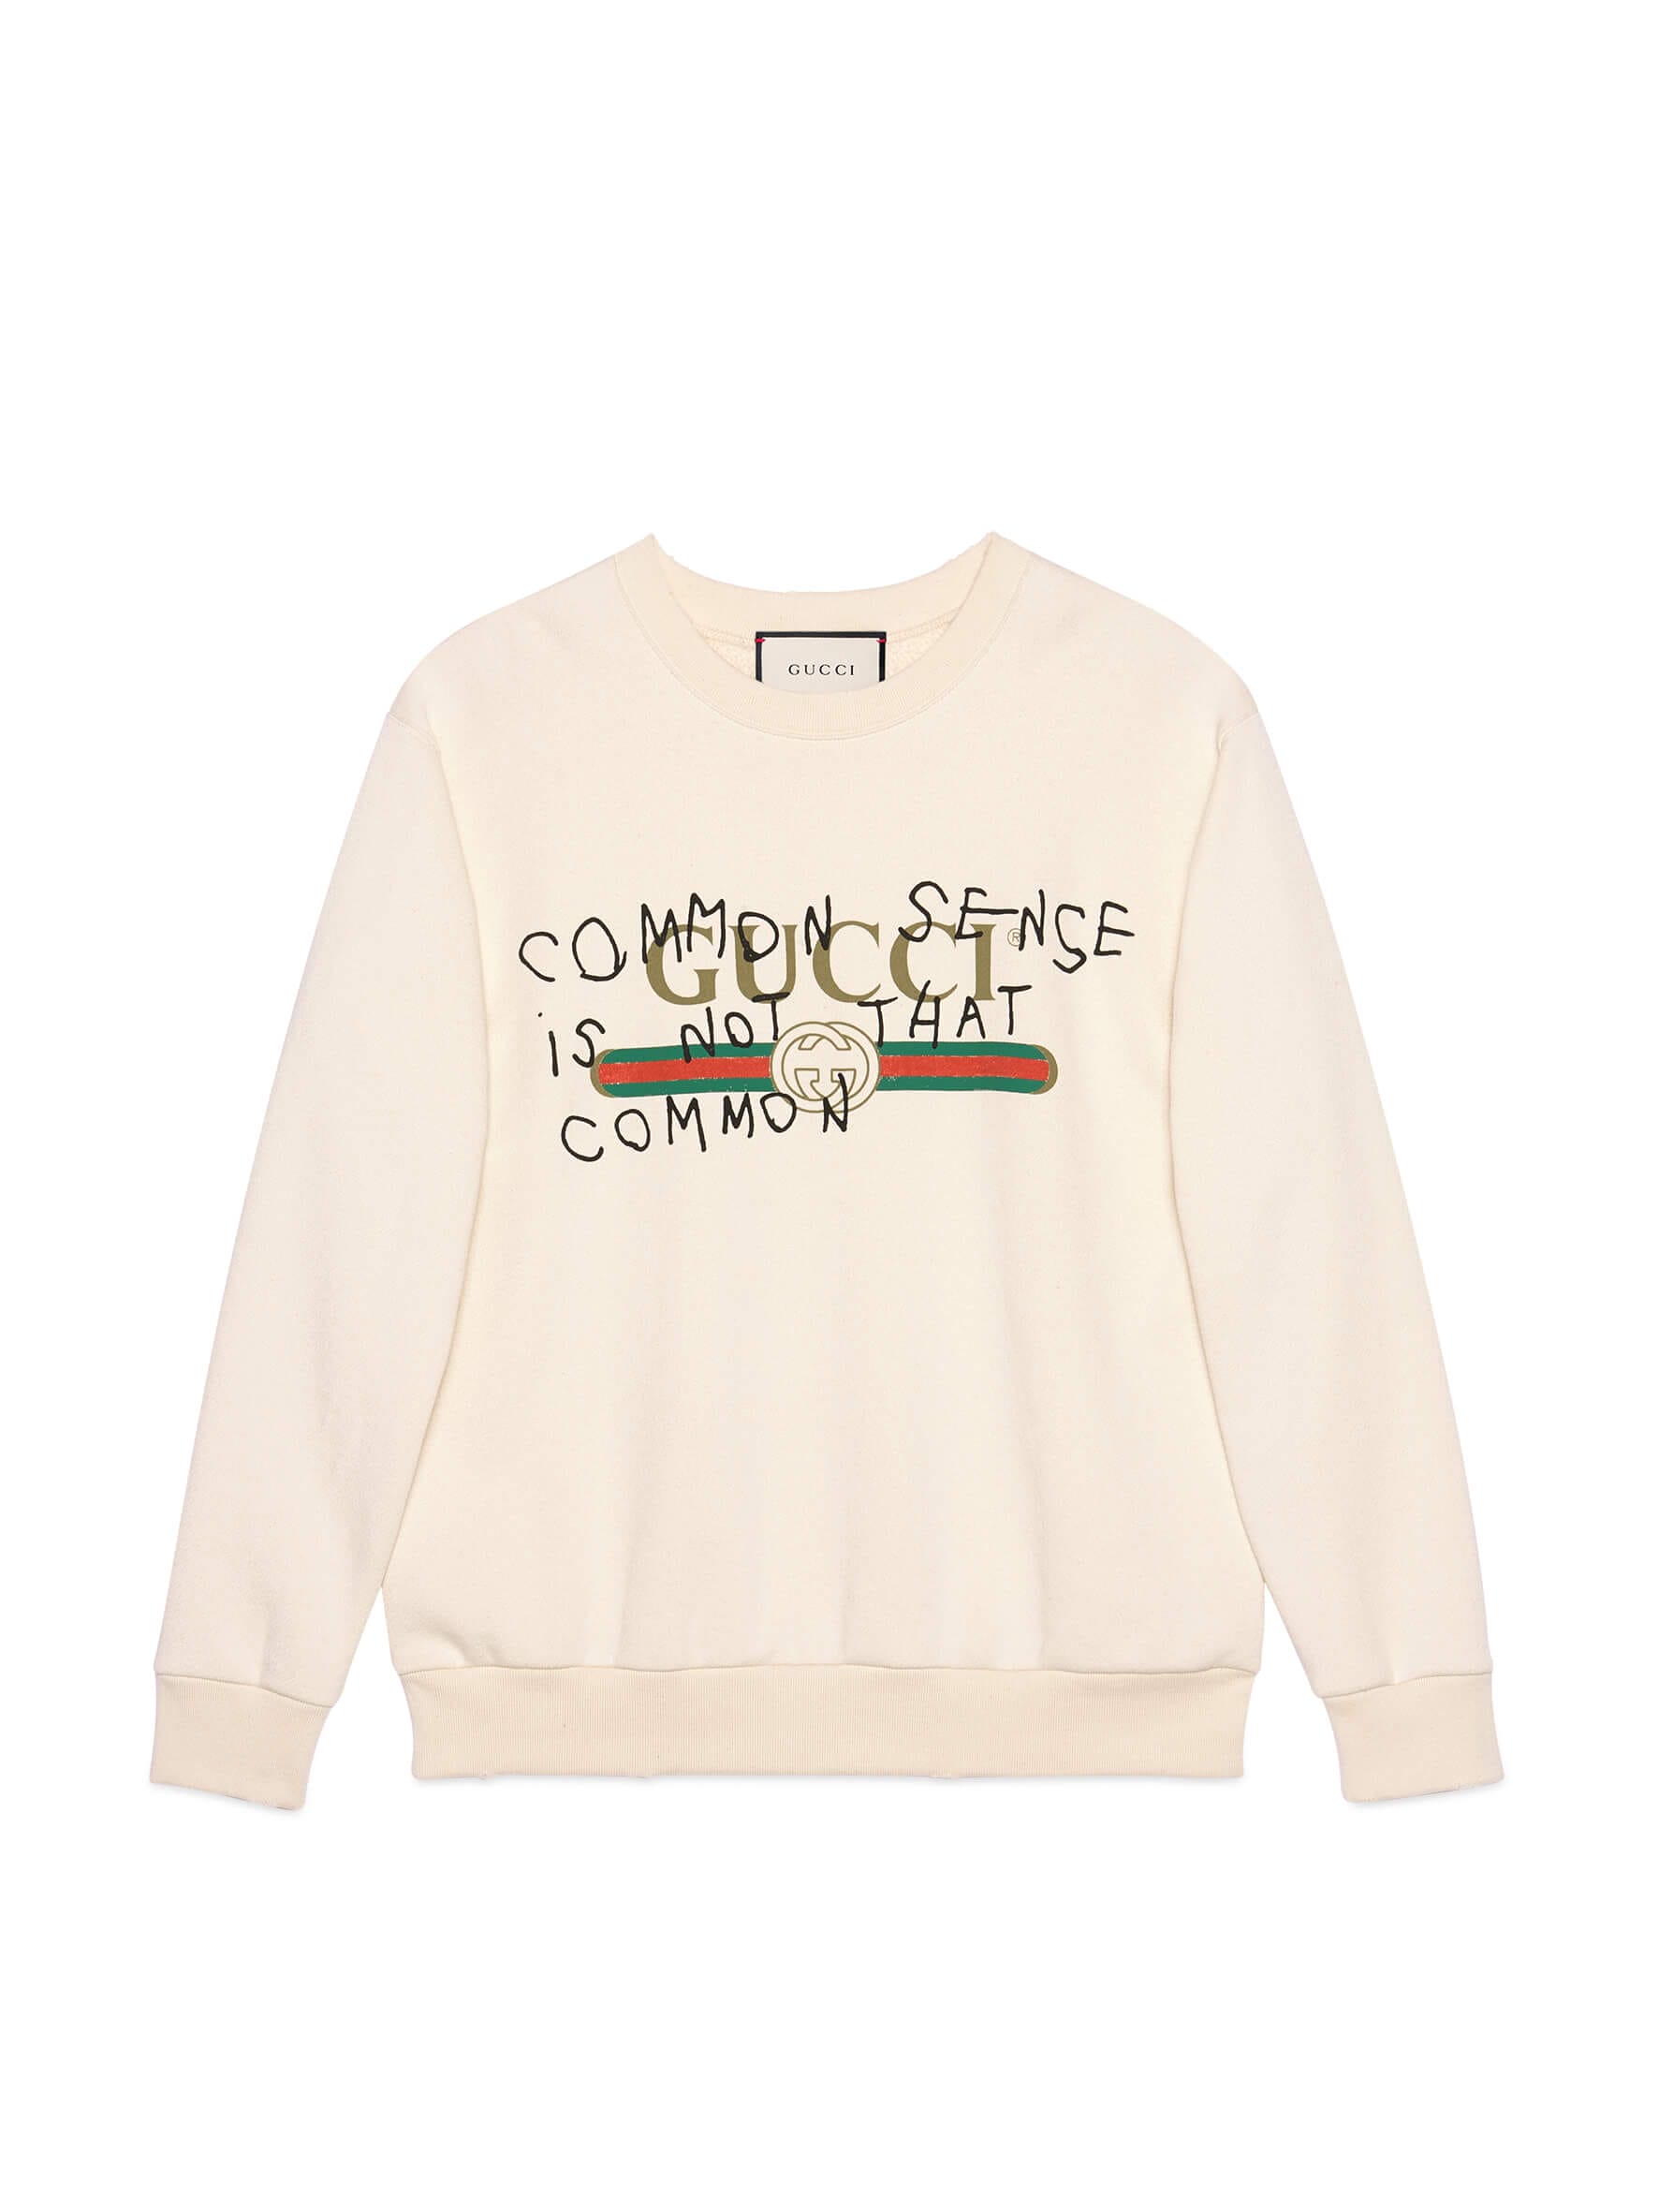 Gucci makes statement with new capsule with Coco Capitán - Folio